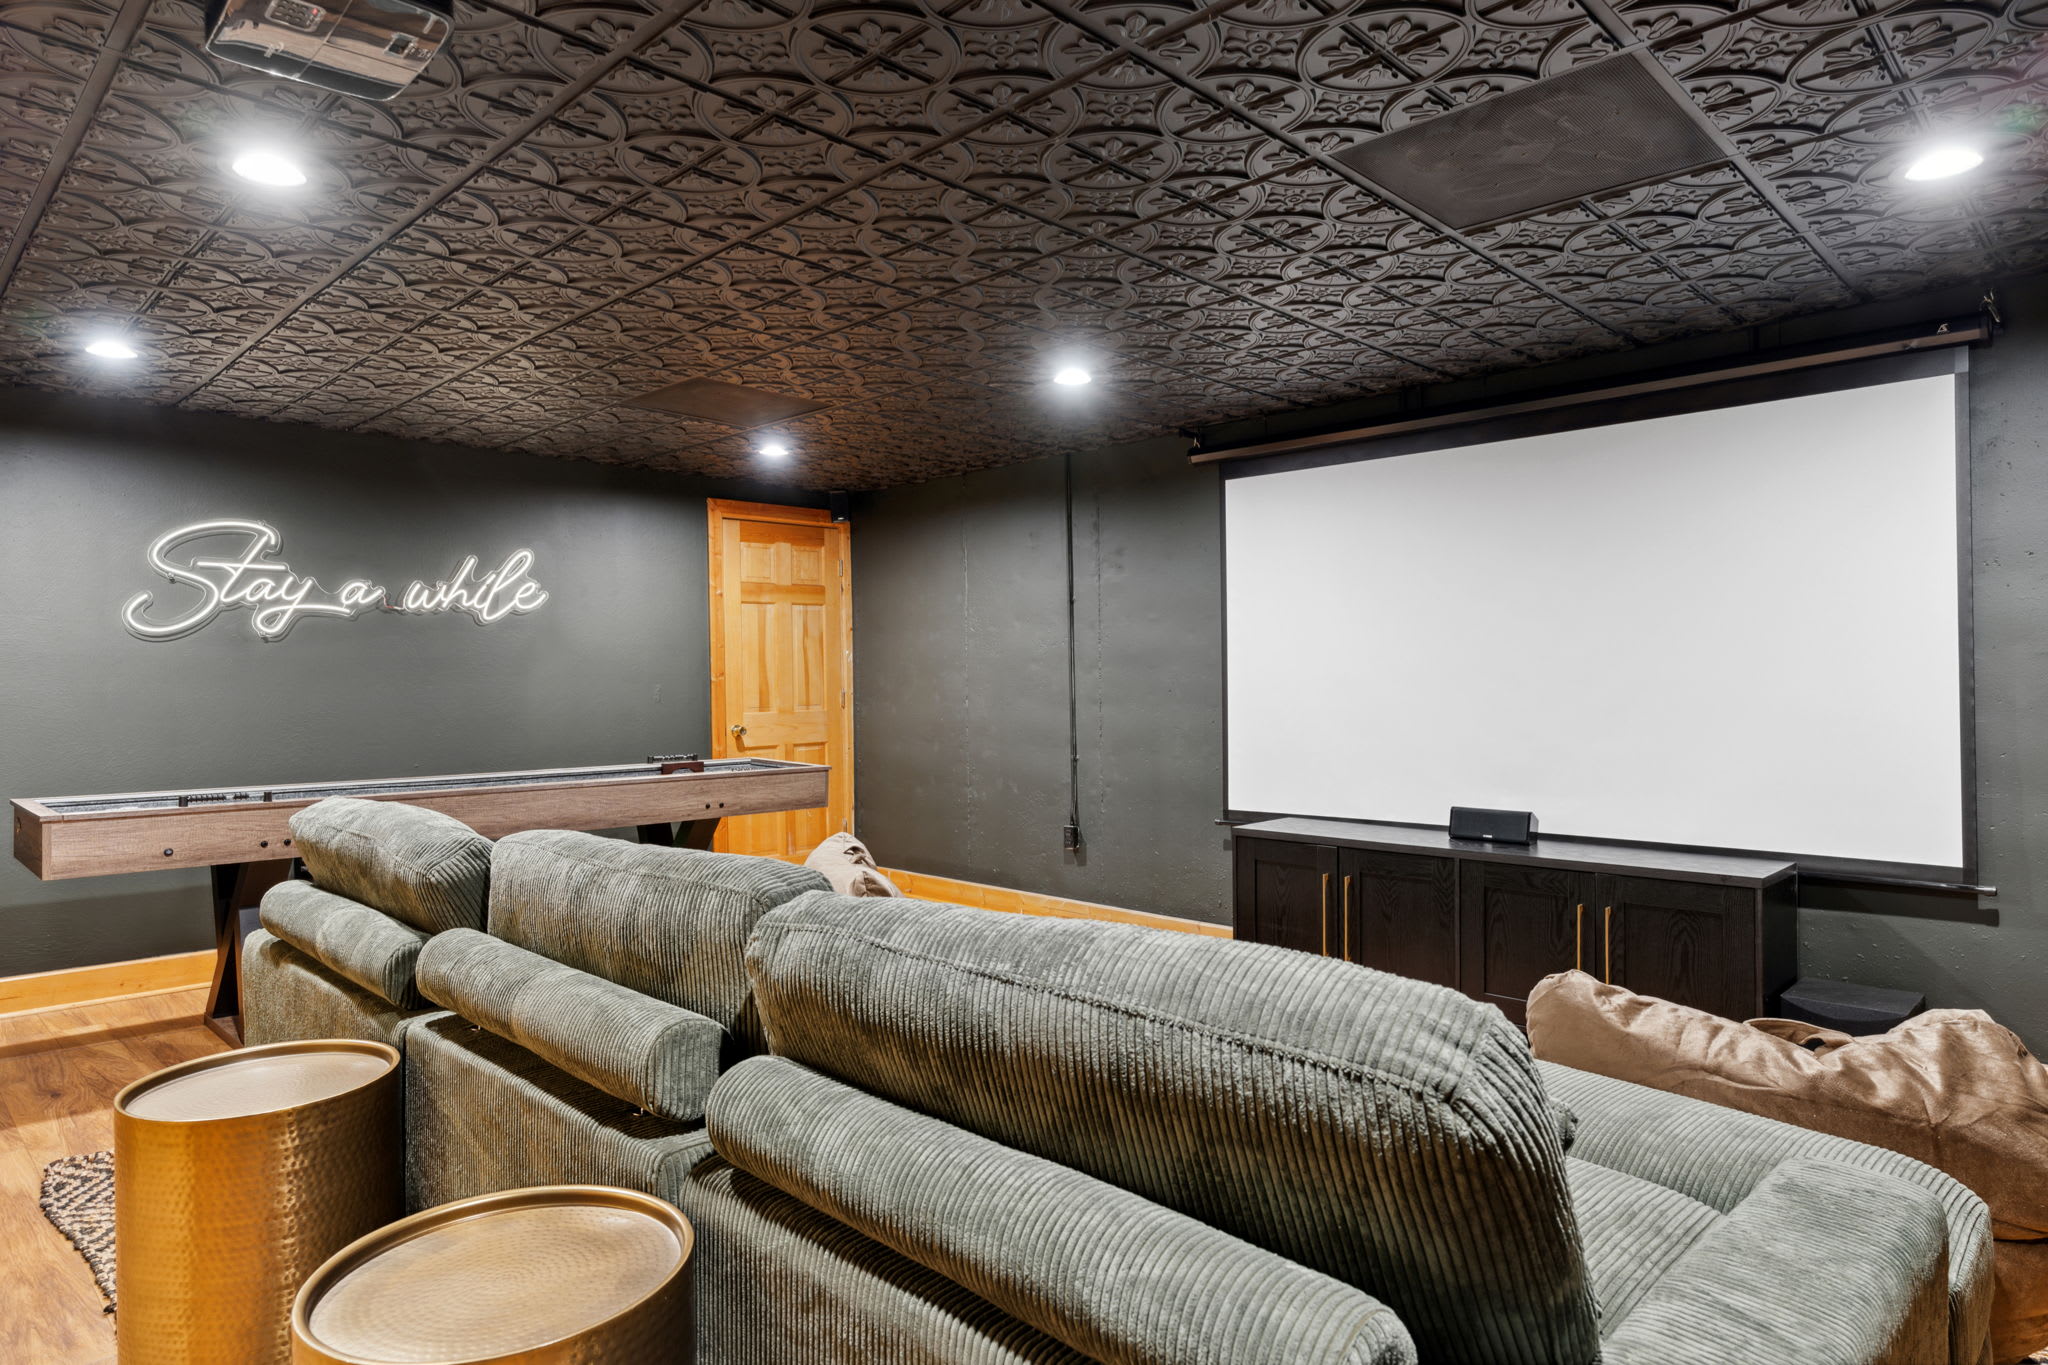 Movie Theater with a seriously comfy and way oversized couch. Bean bags for more seating up front and a legit movie screen. Shuffleboard, Darts, Scrabble, and mini basketball